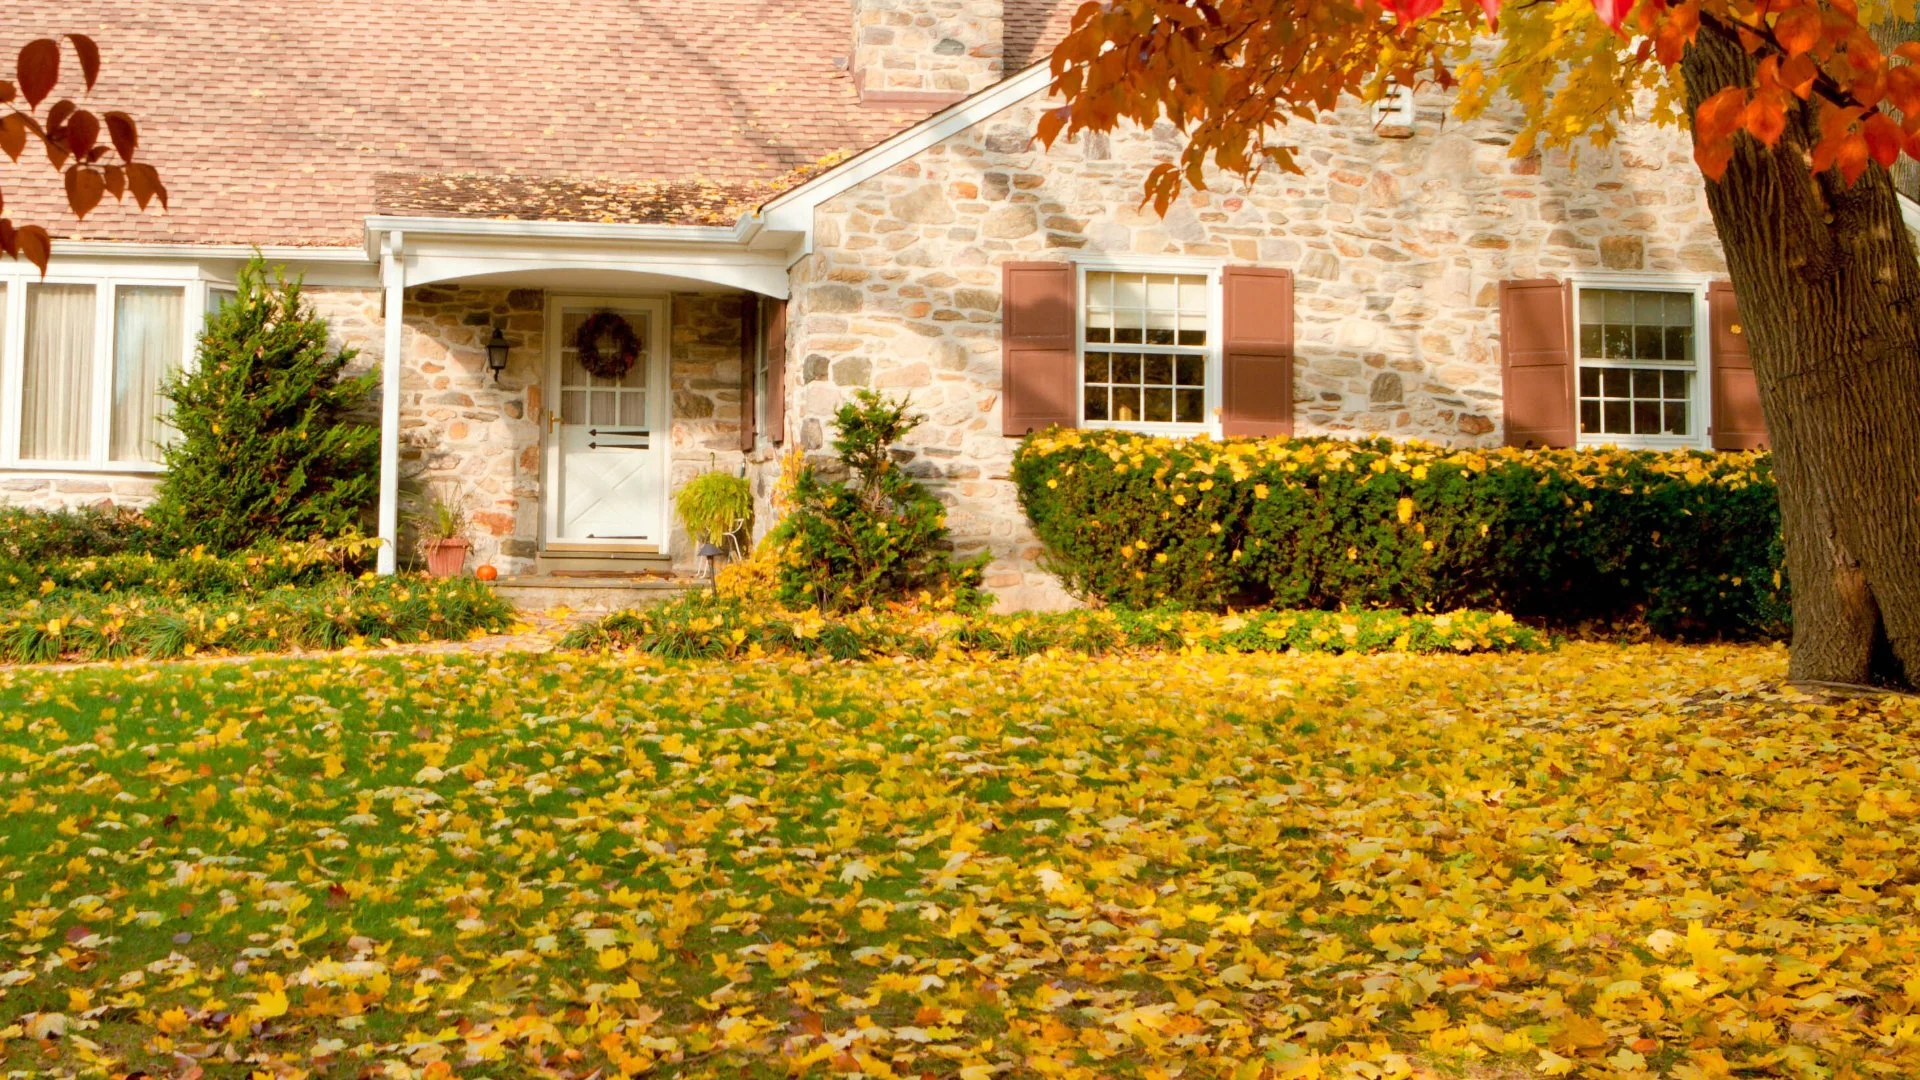 What Problems Can Come From Leaving the Leaf Piles on Your Lawn This Fall?